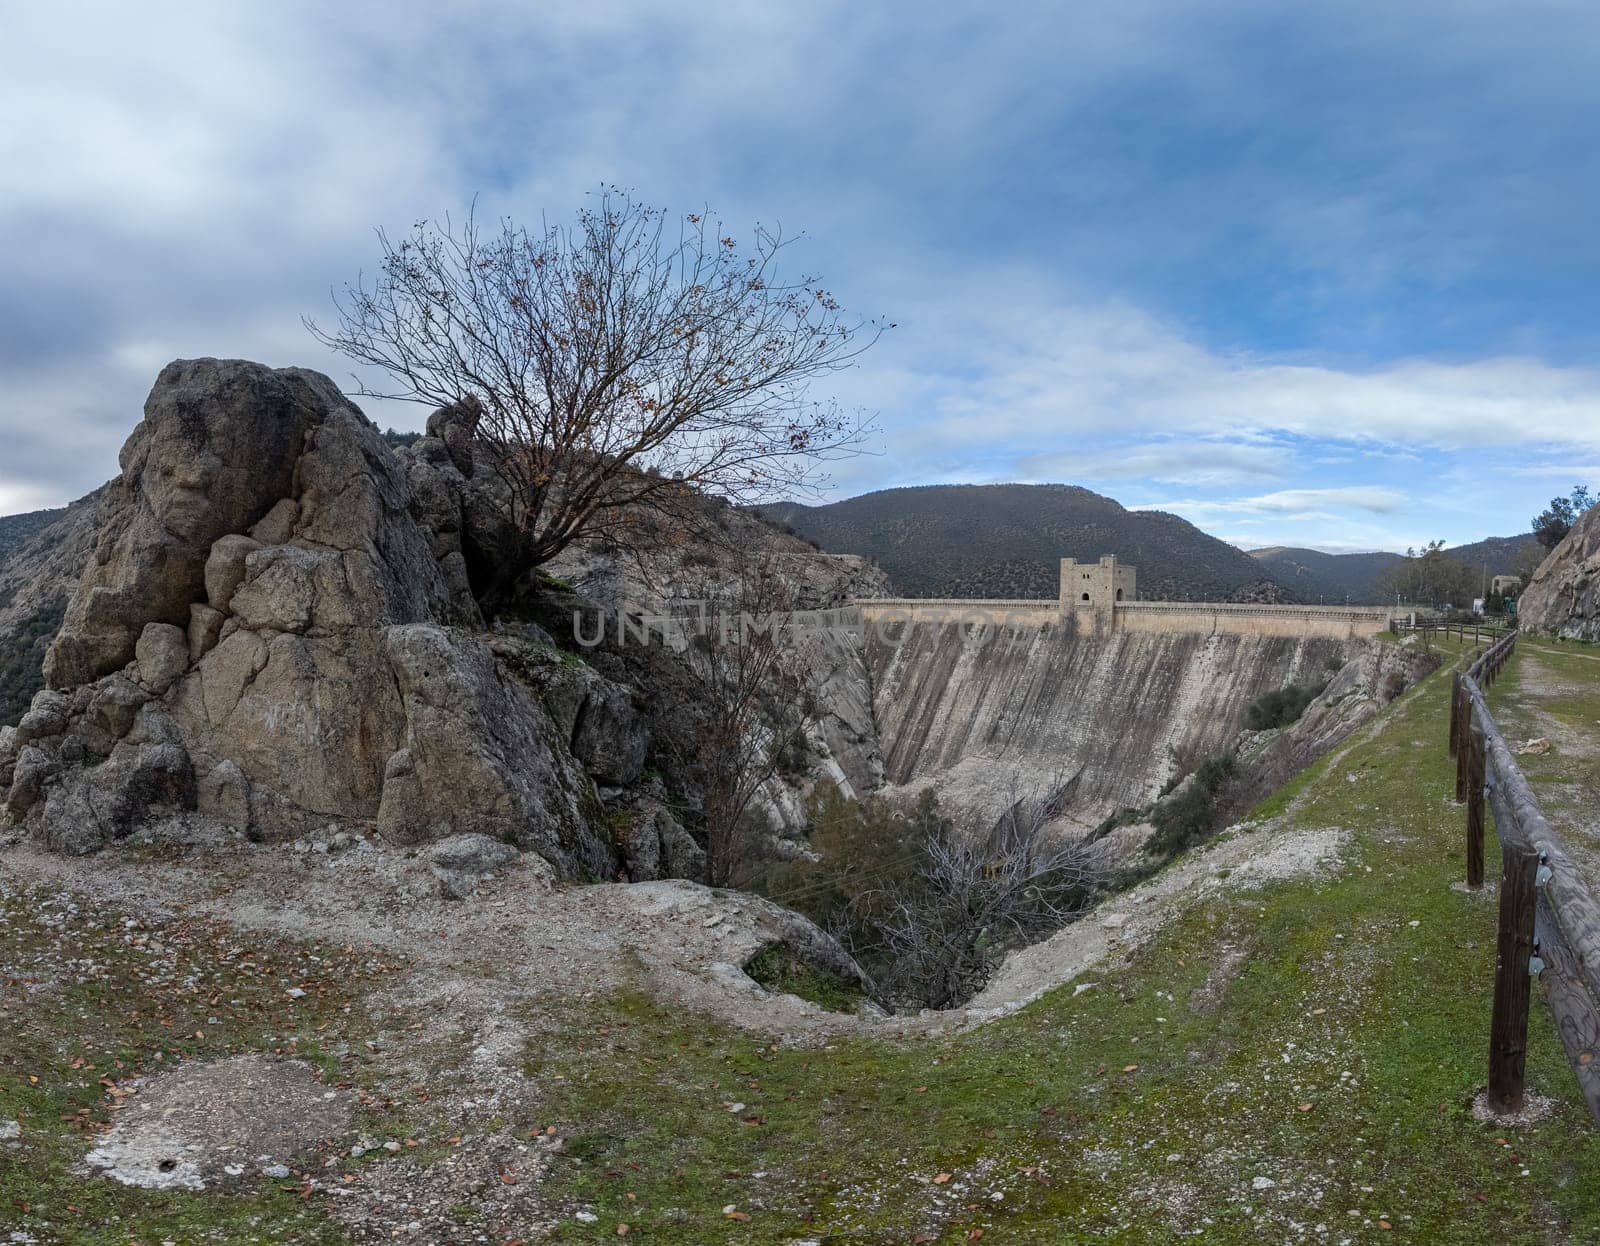 Scenic View of an Ancient Dam in Remote Countryside by FerradalFCG